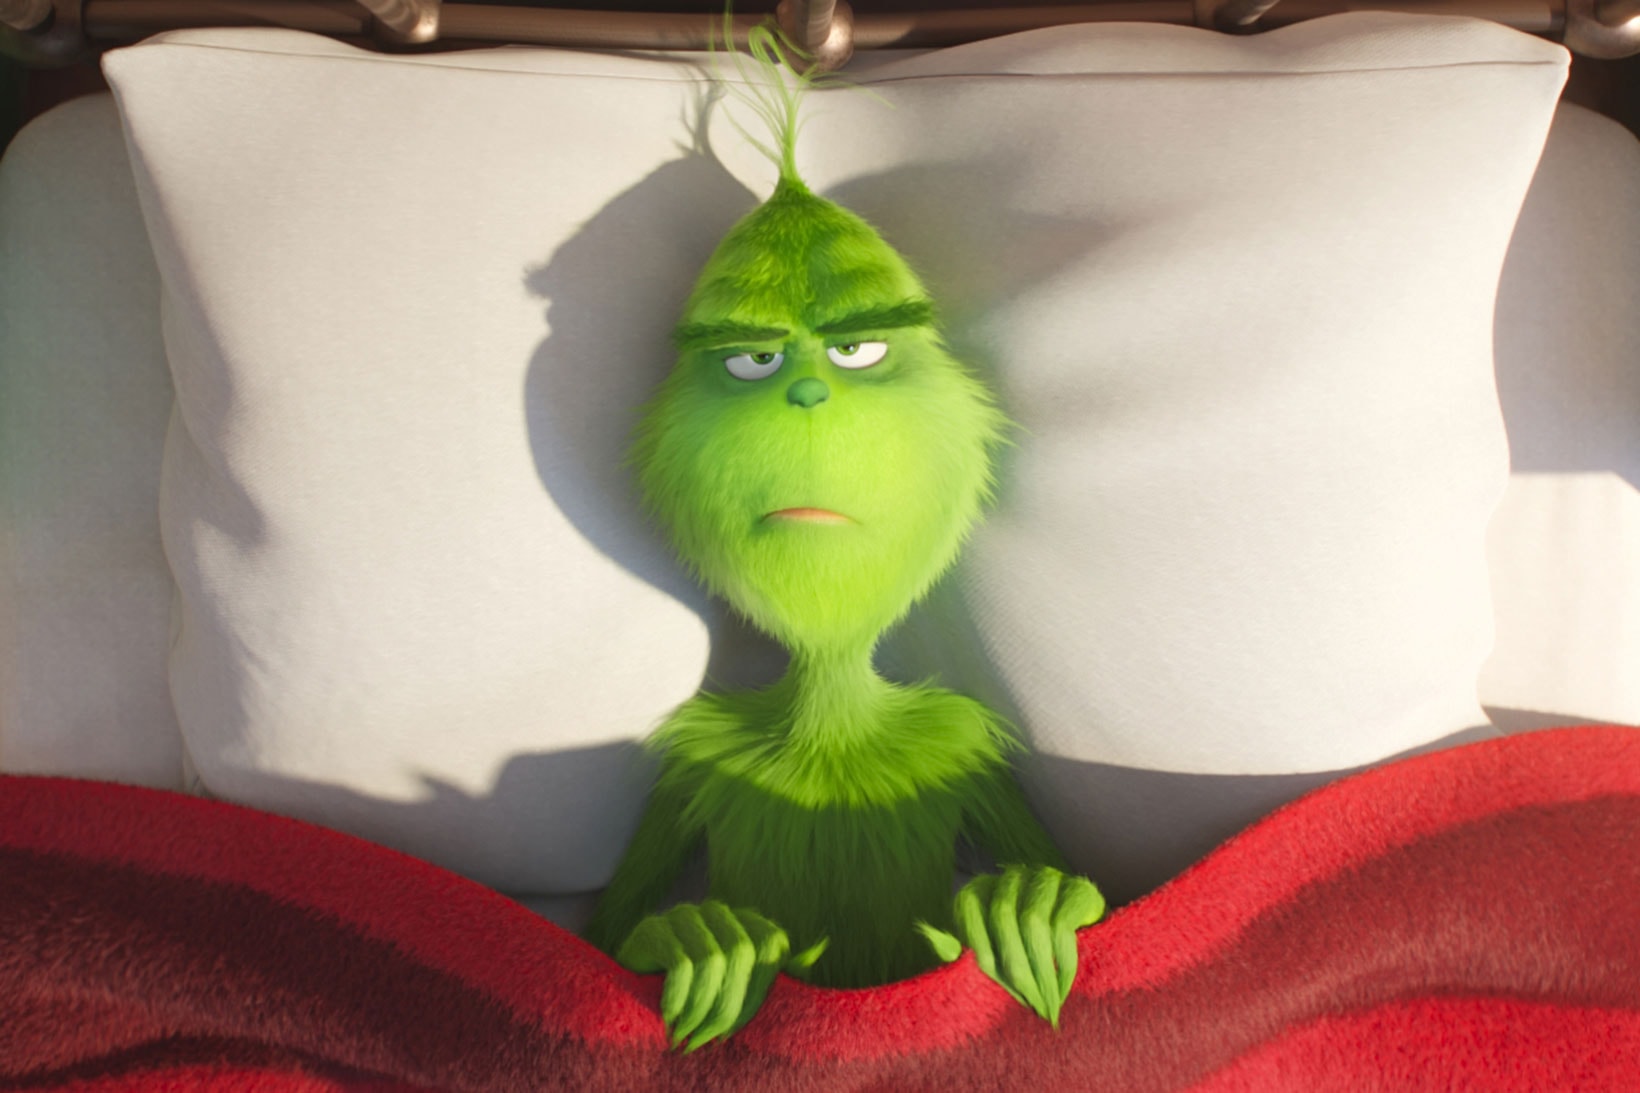 The Grinch Animated Movie